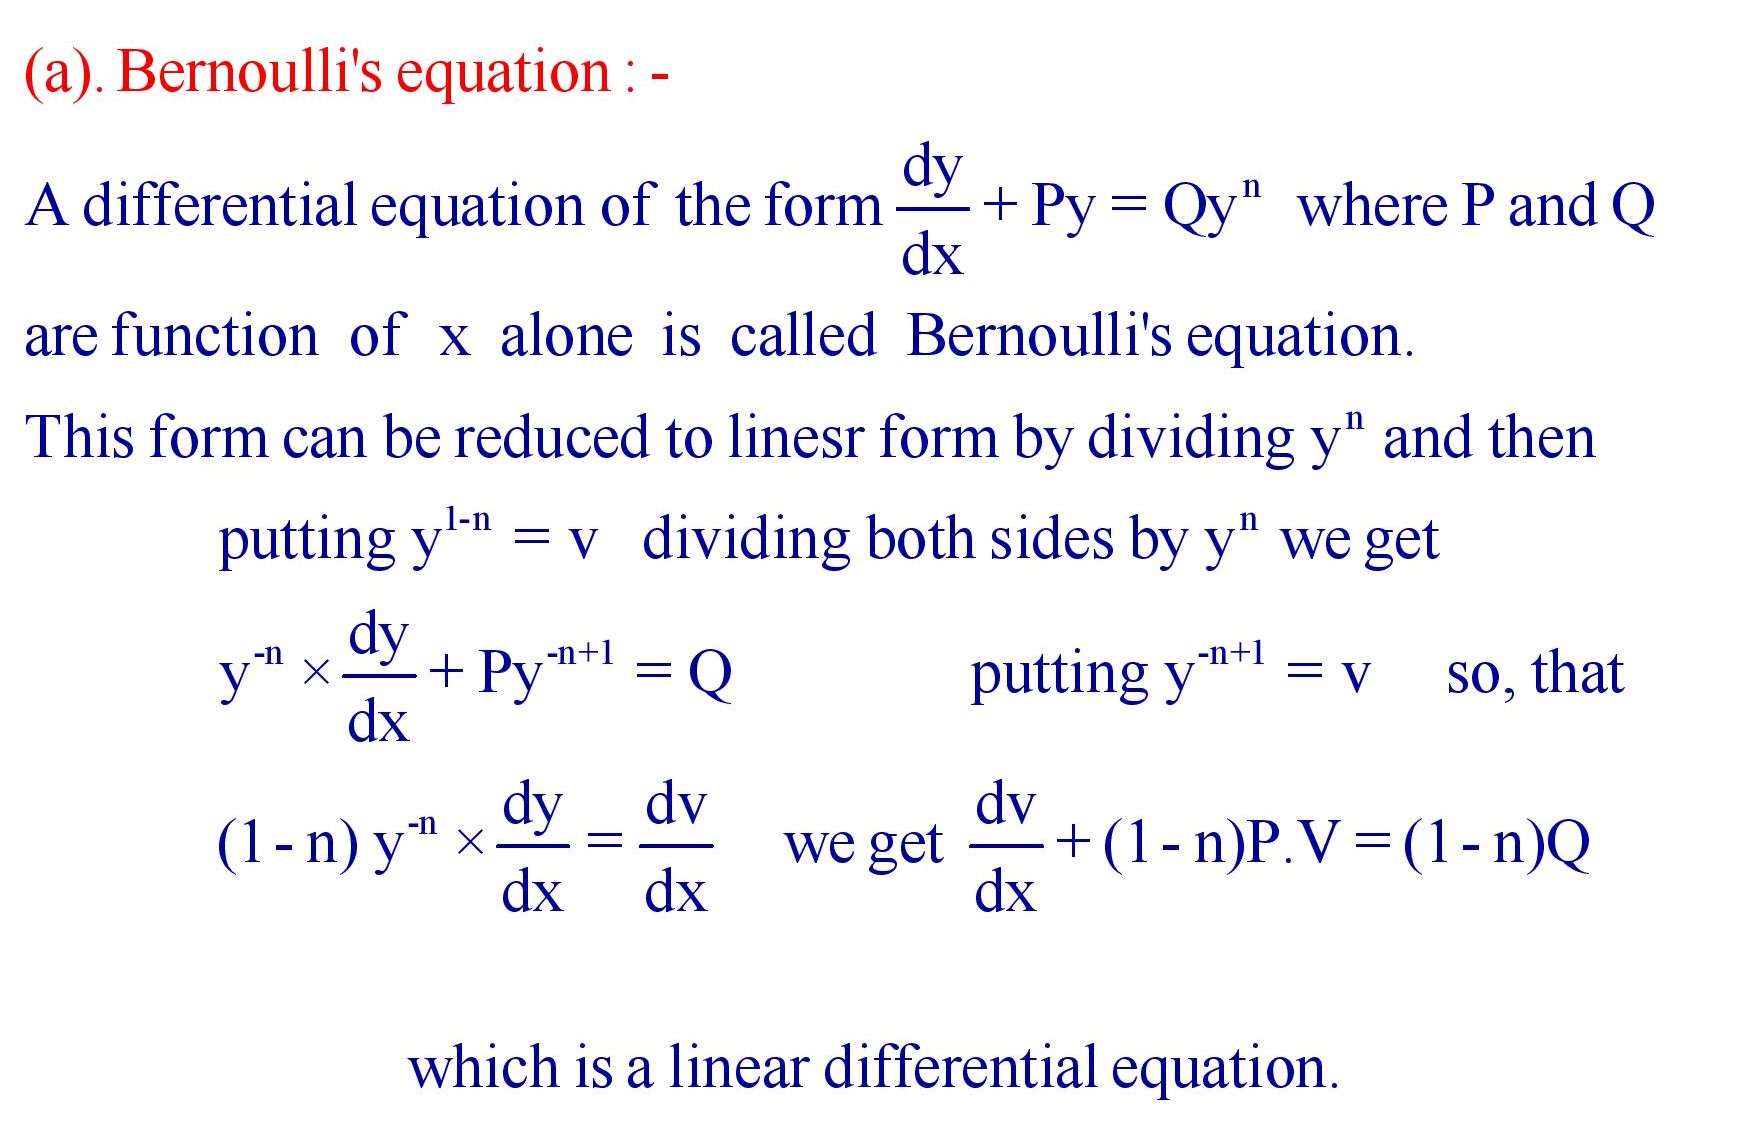 Equation reducible to linear form